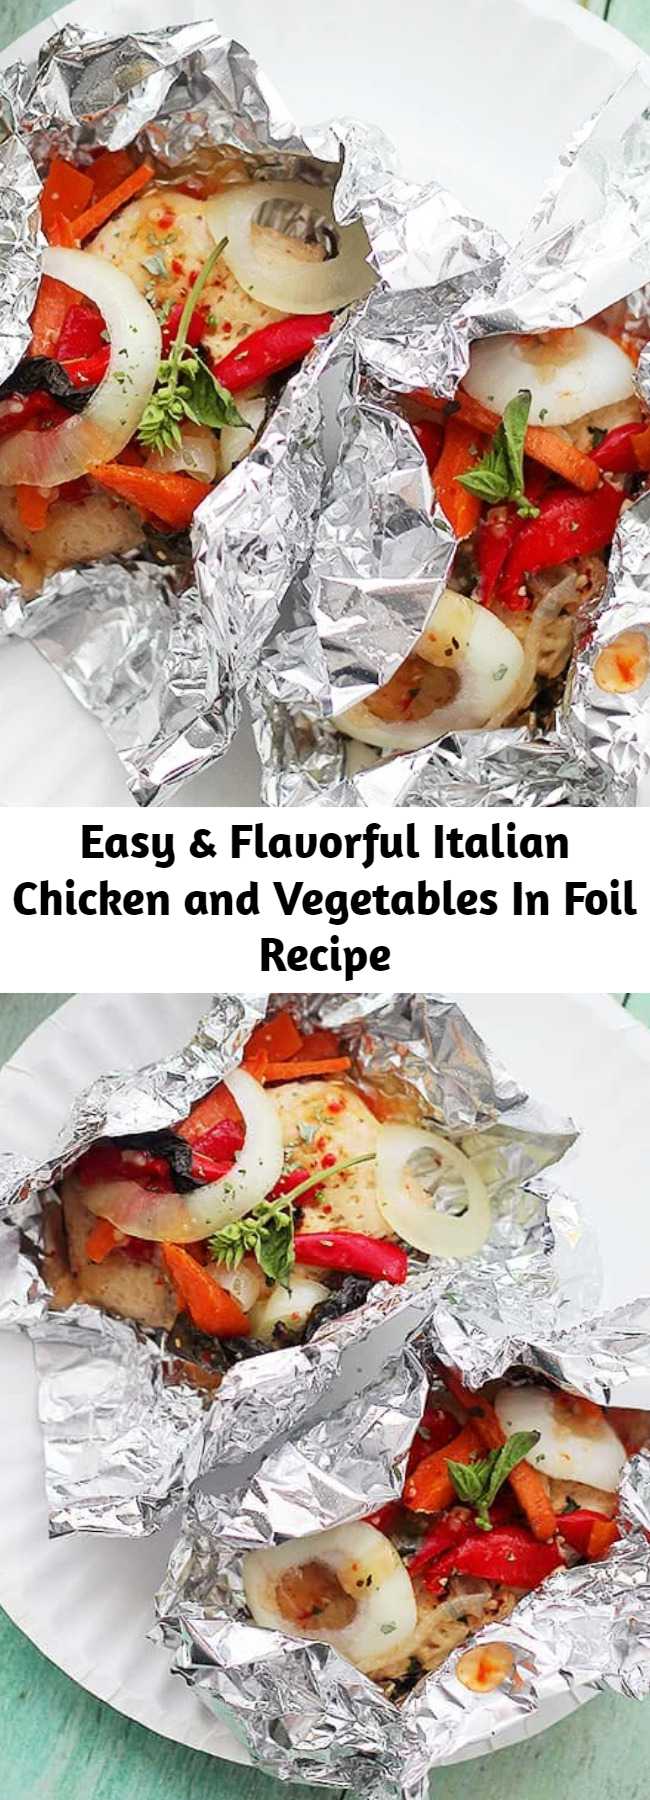 Easy & Flavorful Italian Chicken and Vegetables In Foil Recipe - Italian Chicken and Vegetables In Foil is such an easy & delicious chicken recipe! Flavorful, incredibly moist chicken breasts baked in aluminum foil with peppers, onion, garlic, fresh herbs and Italian Dressing. #chickenbreasts #foildinner